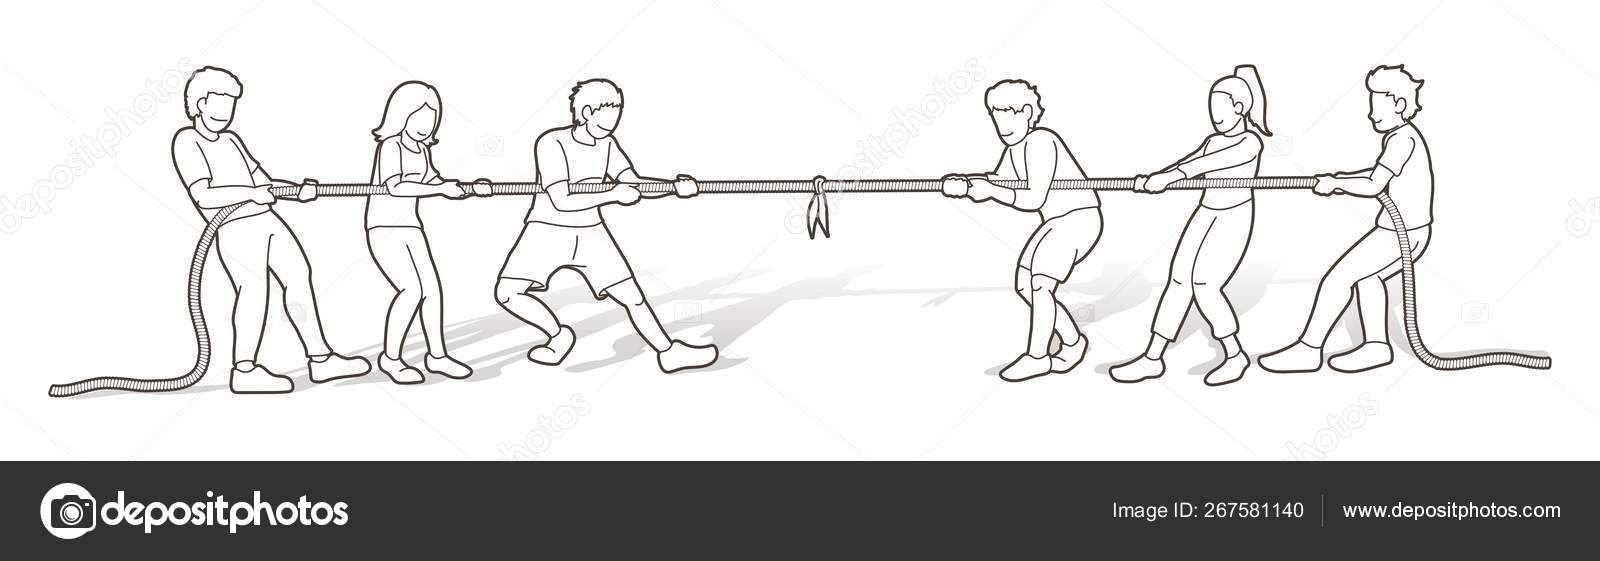 Children Playing Tug War Cartoon Graphic Vector Stock Vector Image by  ©sila5775 #267581140